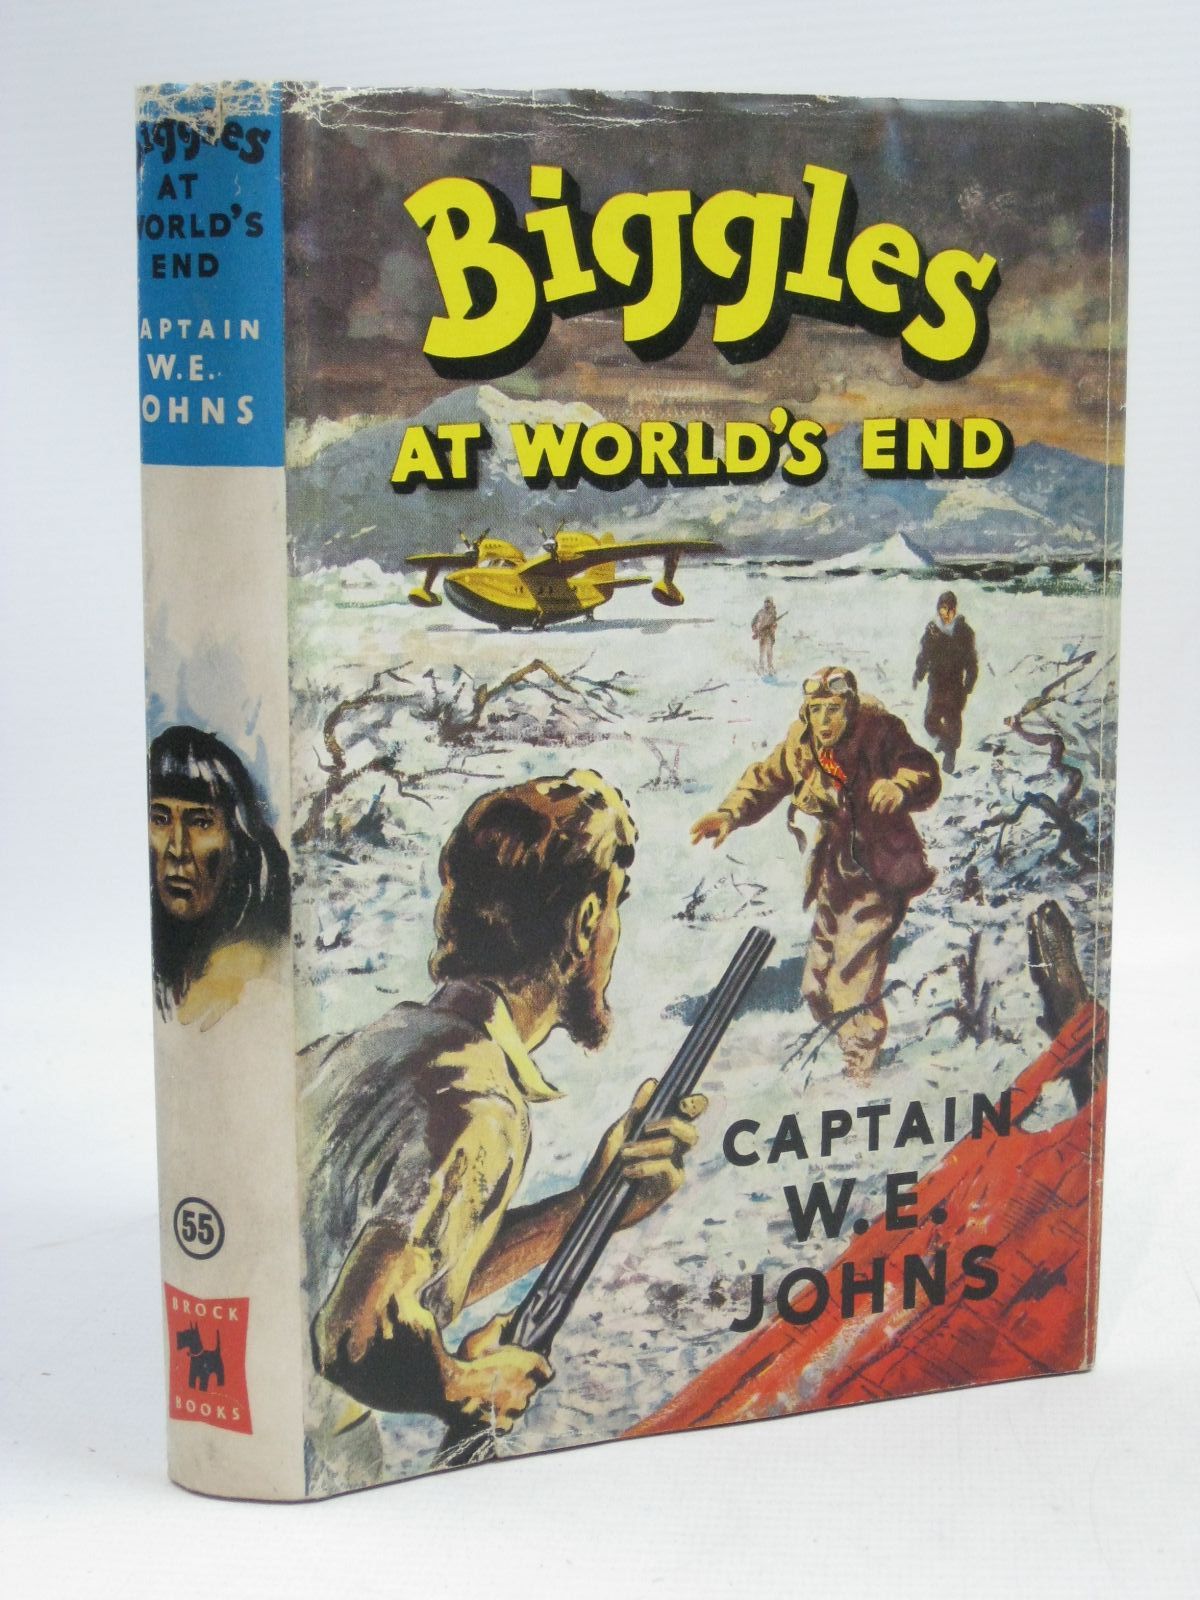 Cover of BIGGLES AT WORLD'S END by W.E. Johns